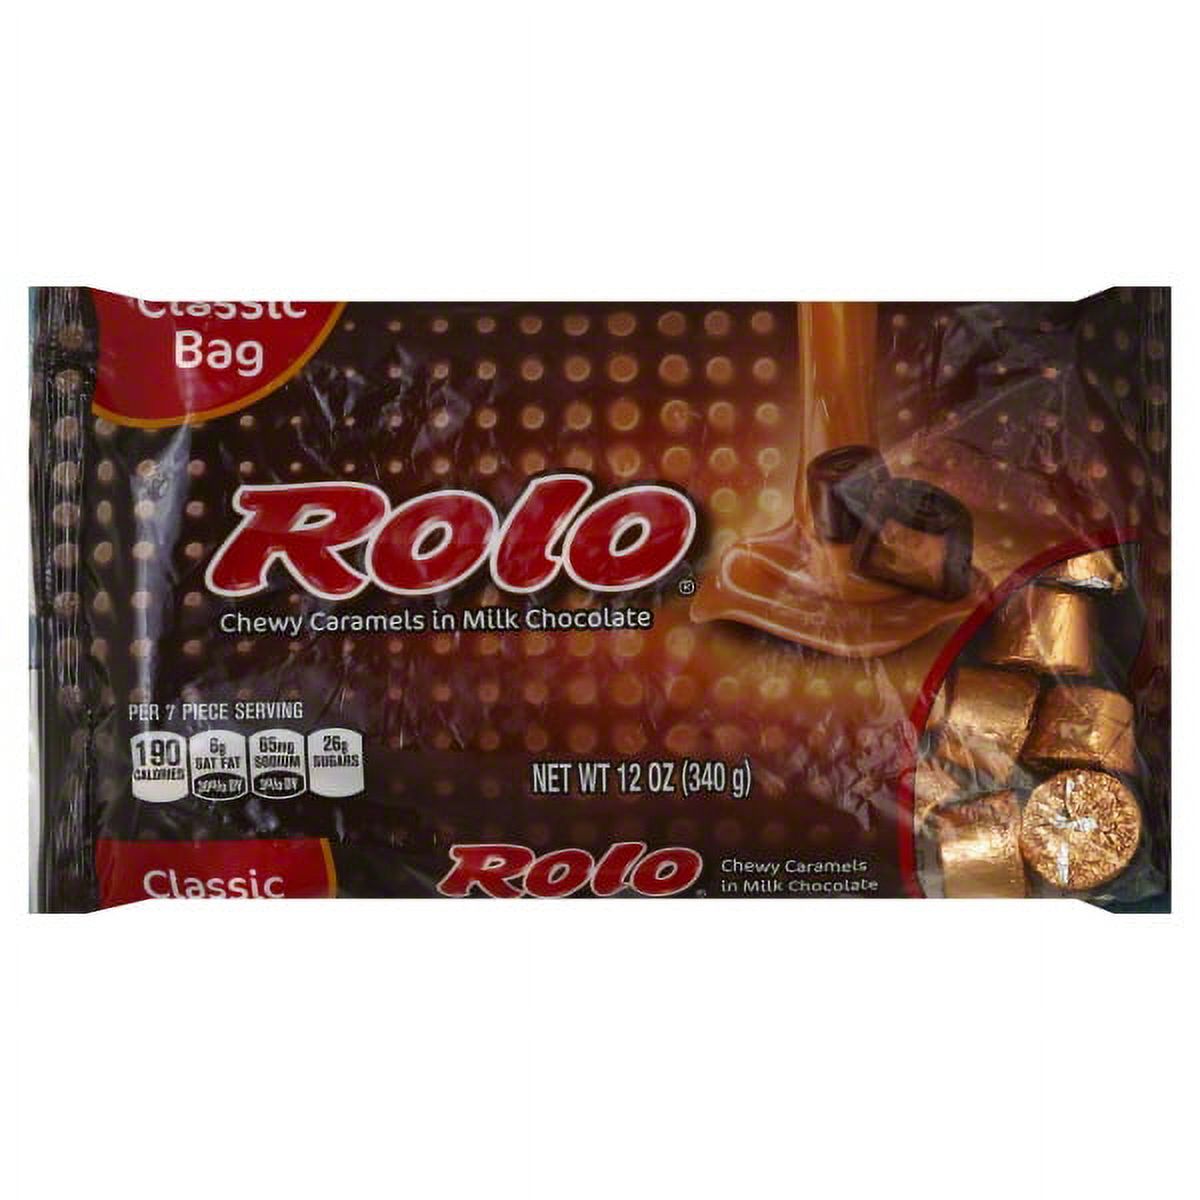 Rolo Chewy Caramels in Milk Chocolate, 12 Oz. - image 1 of 3